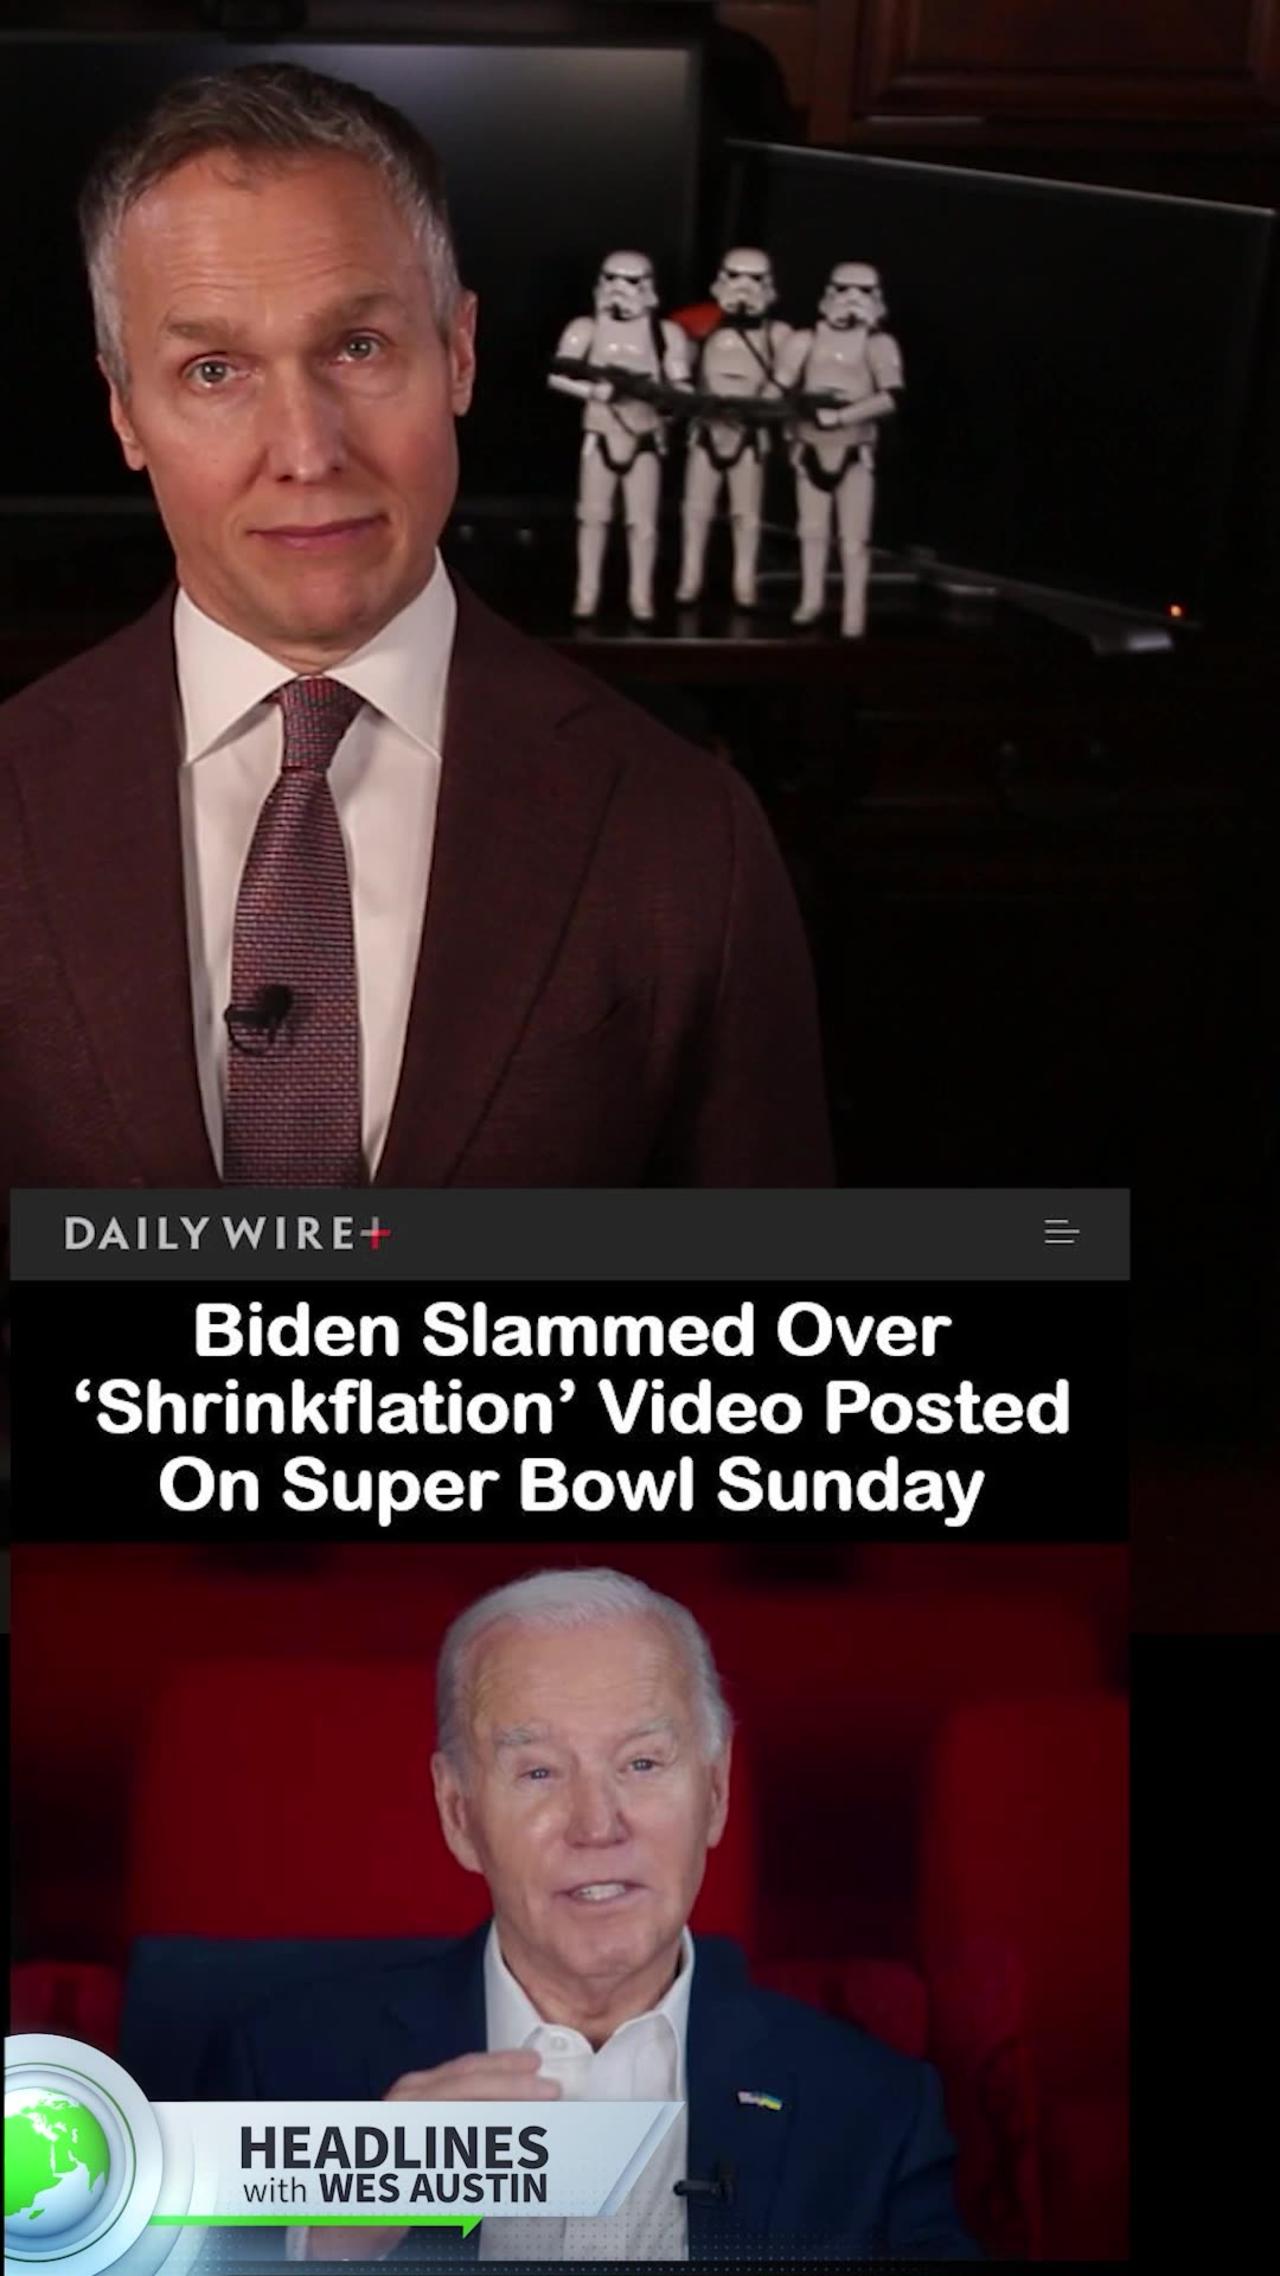 Biden Posts ‘Shrinkflation’ Video on Super Bowl Sunday about Things Getting Smaller